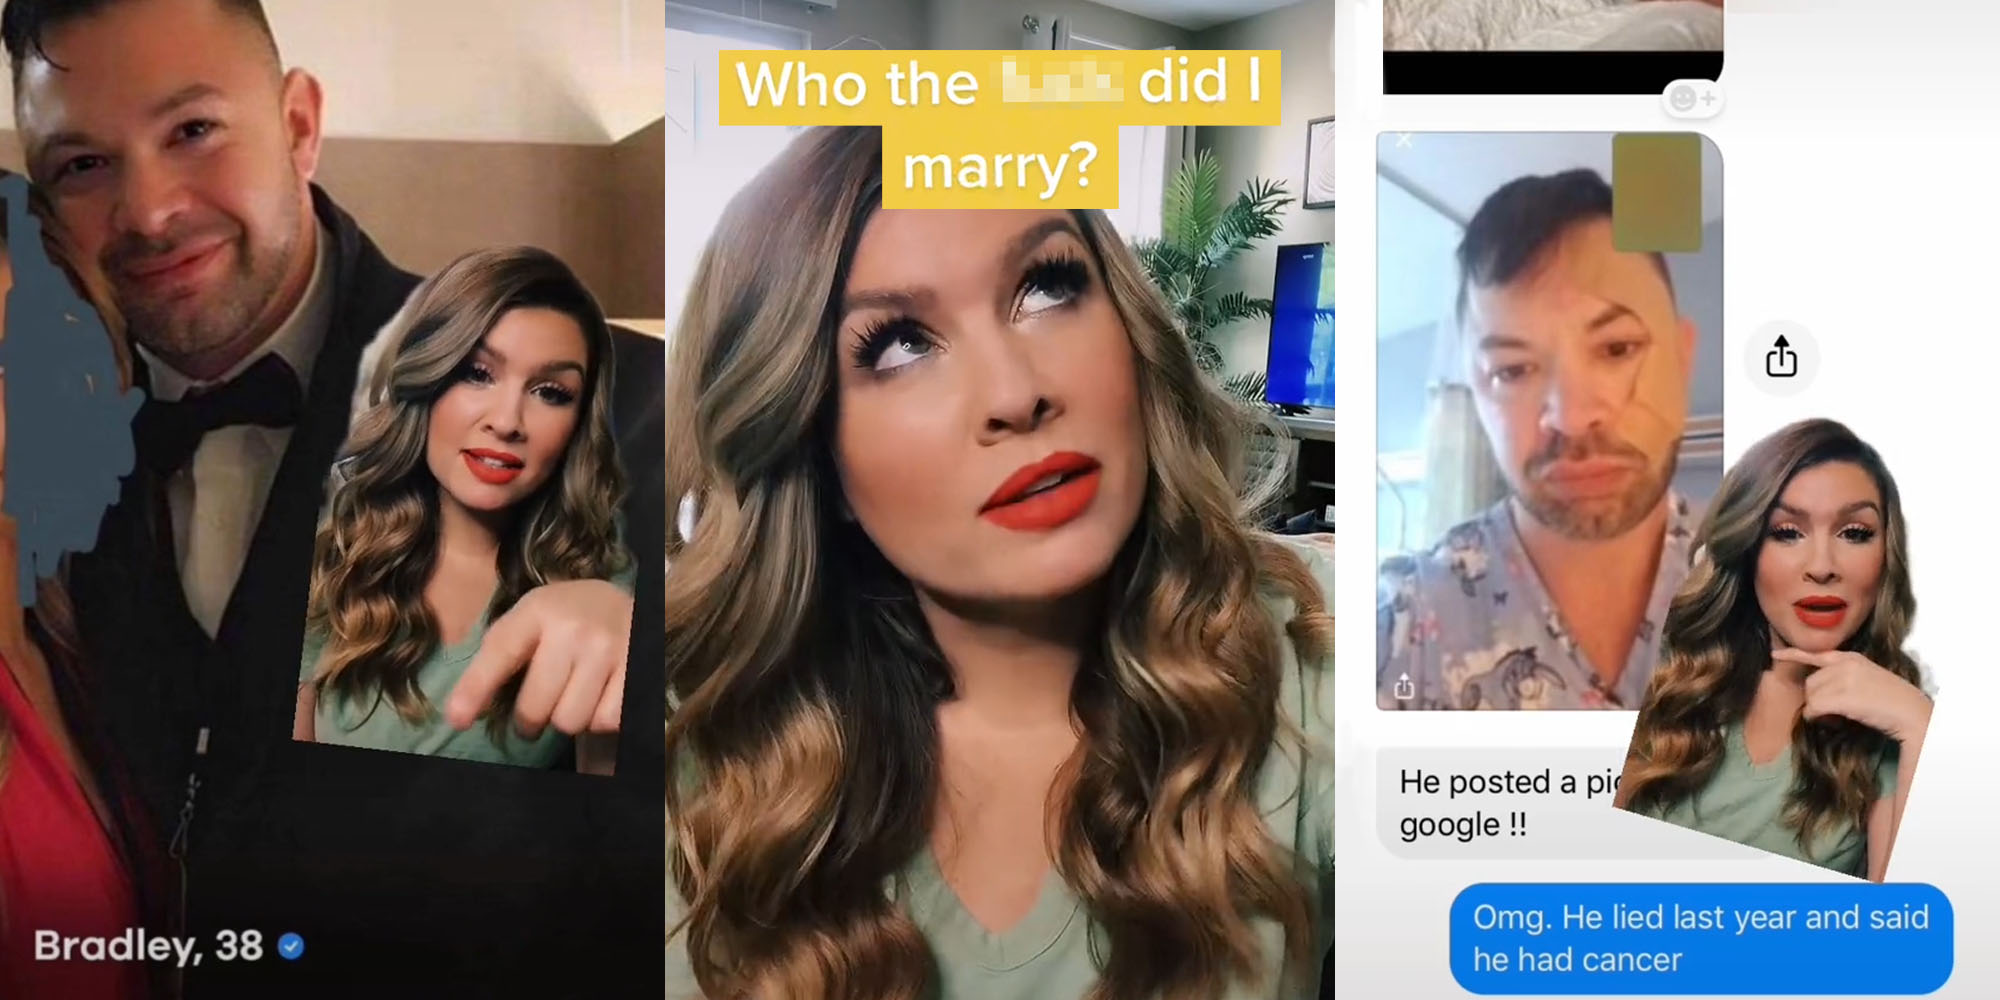 Women Speak Out Against Shared Ex-Husband After TikTok Goes Viral pic